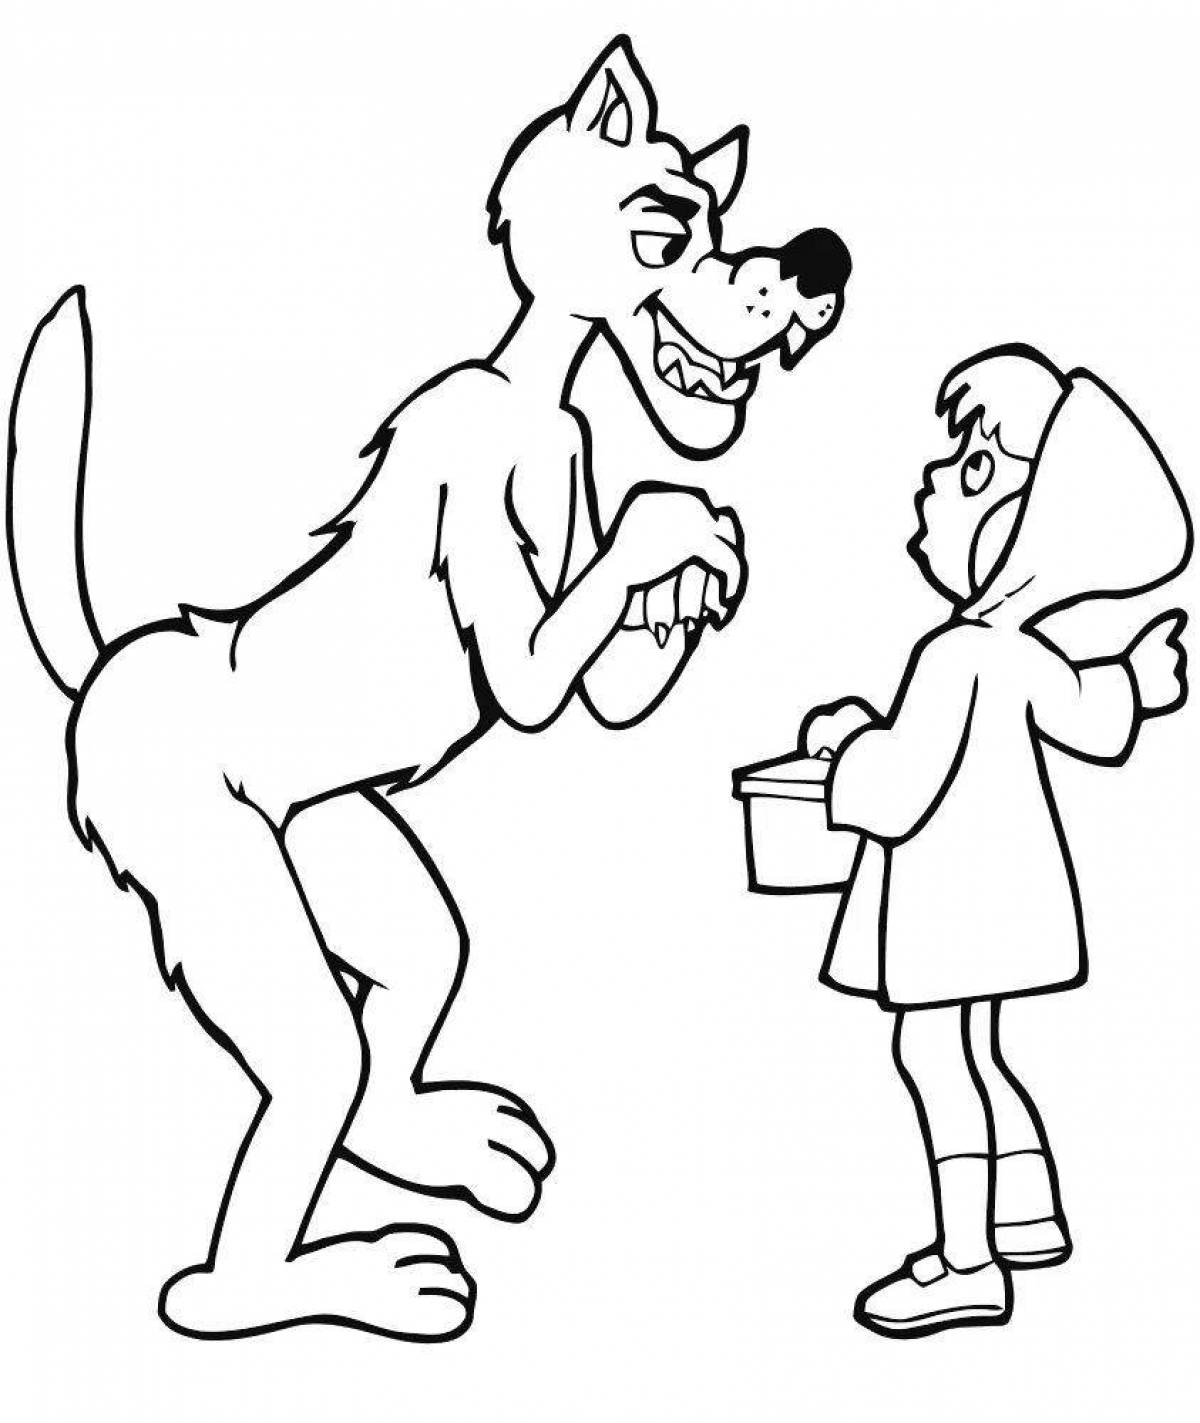 Coloring book bright gray wolf and Little Red Riding Hood